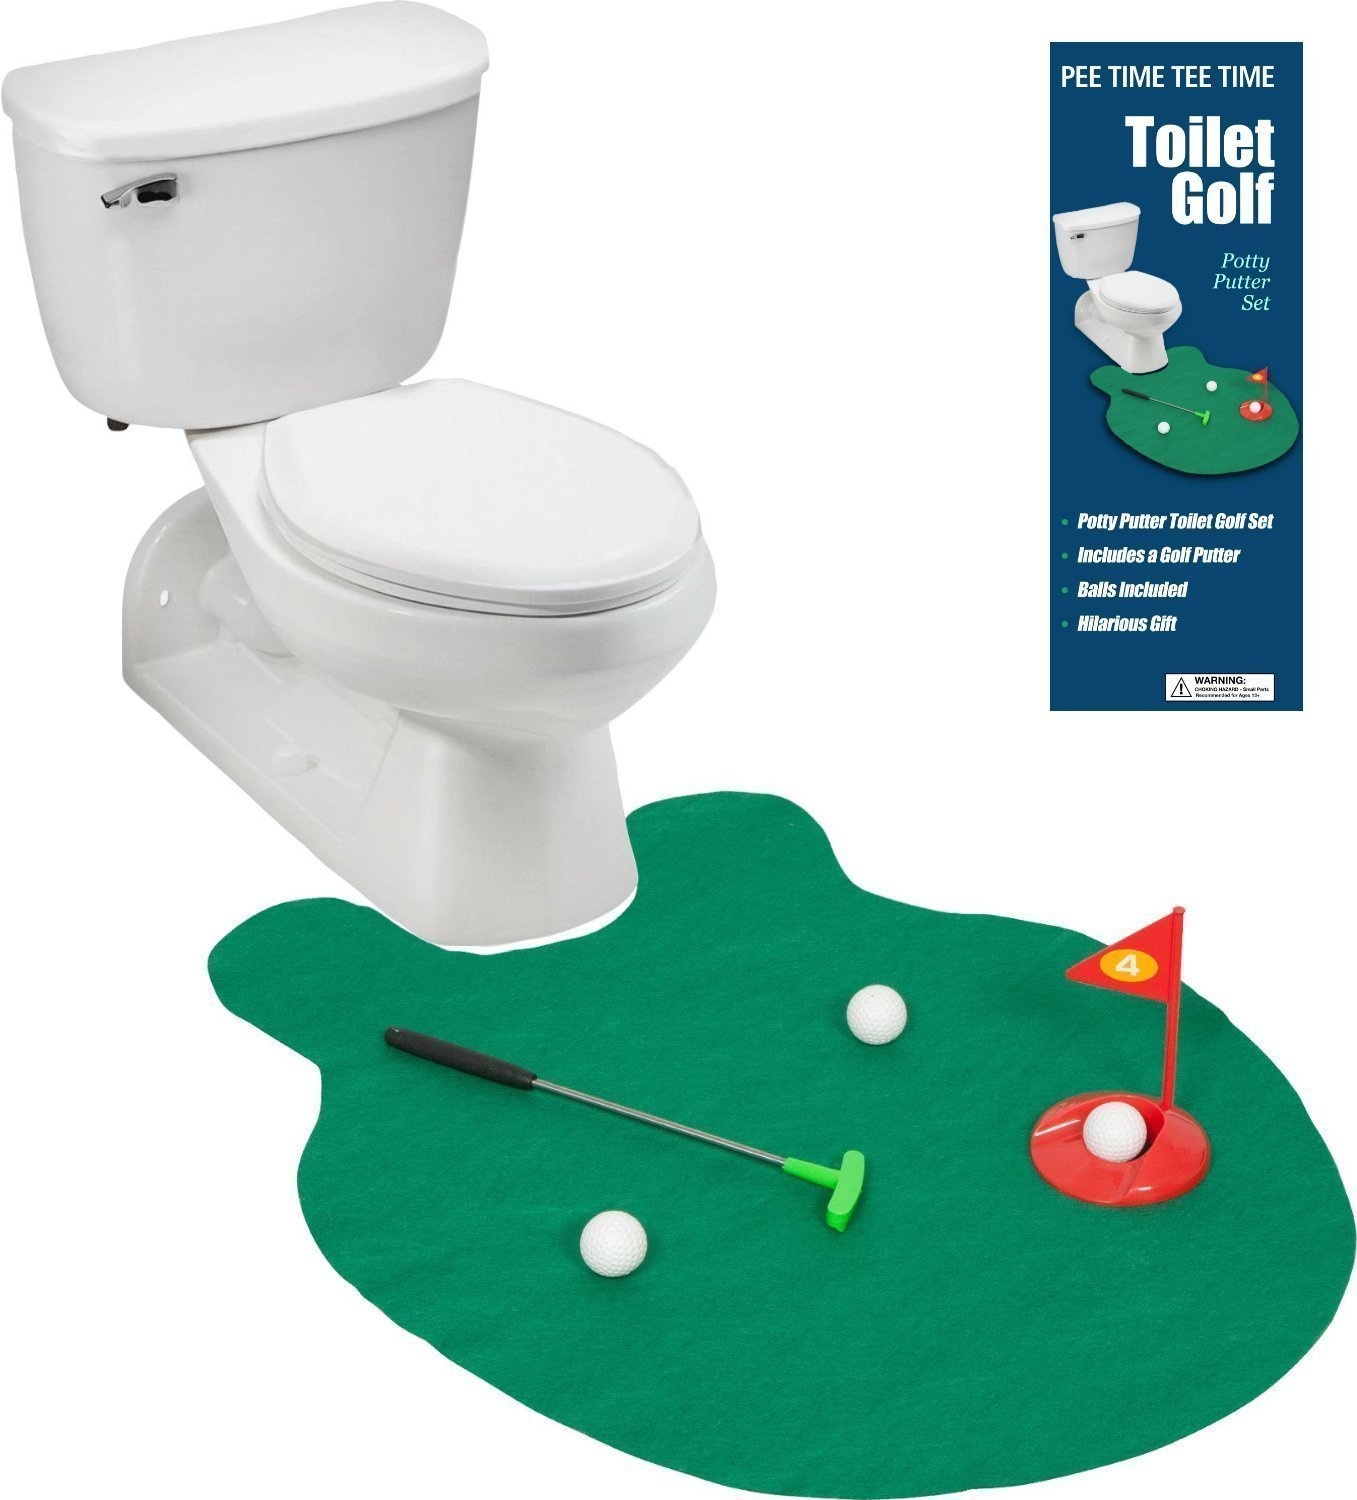 Improve your mini golf game while you use the toilet.